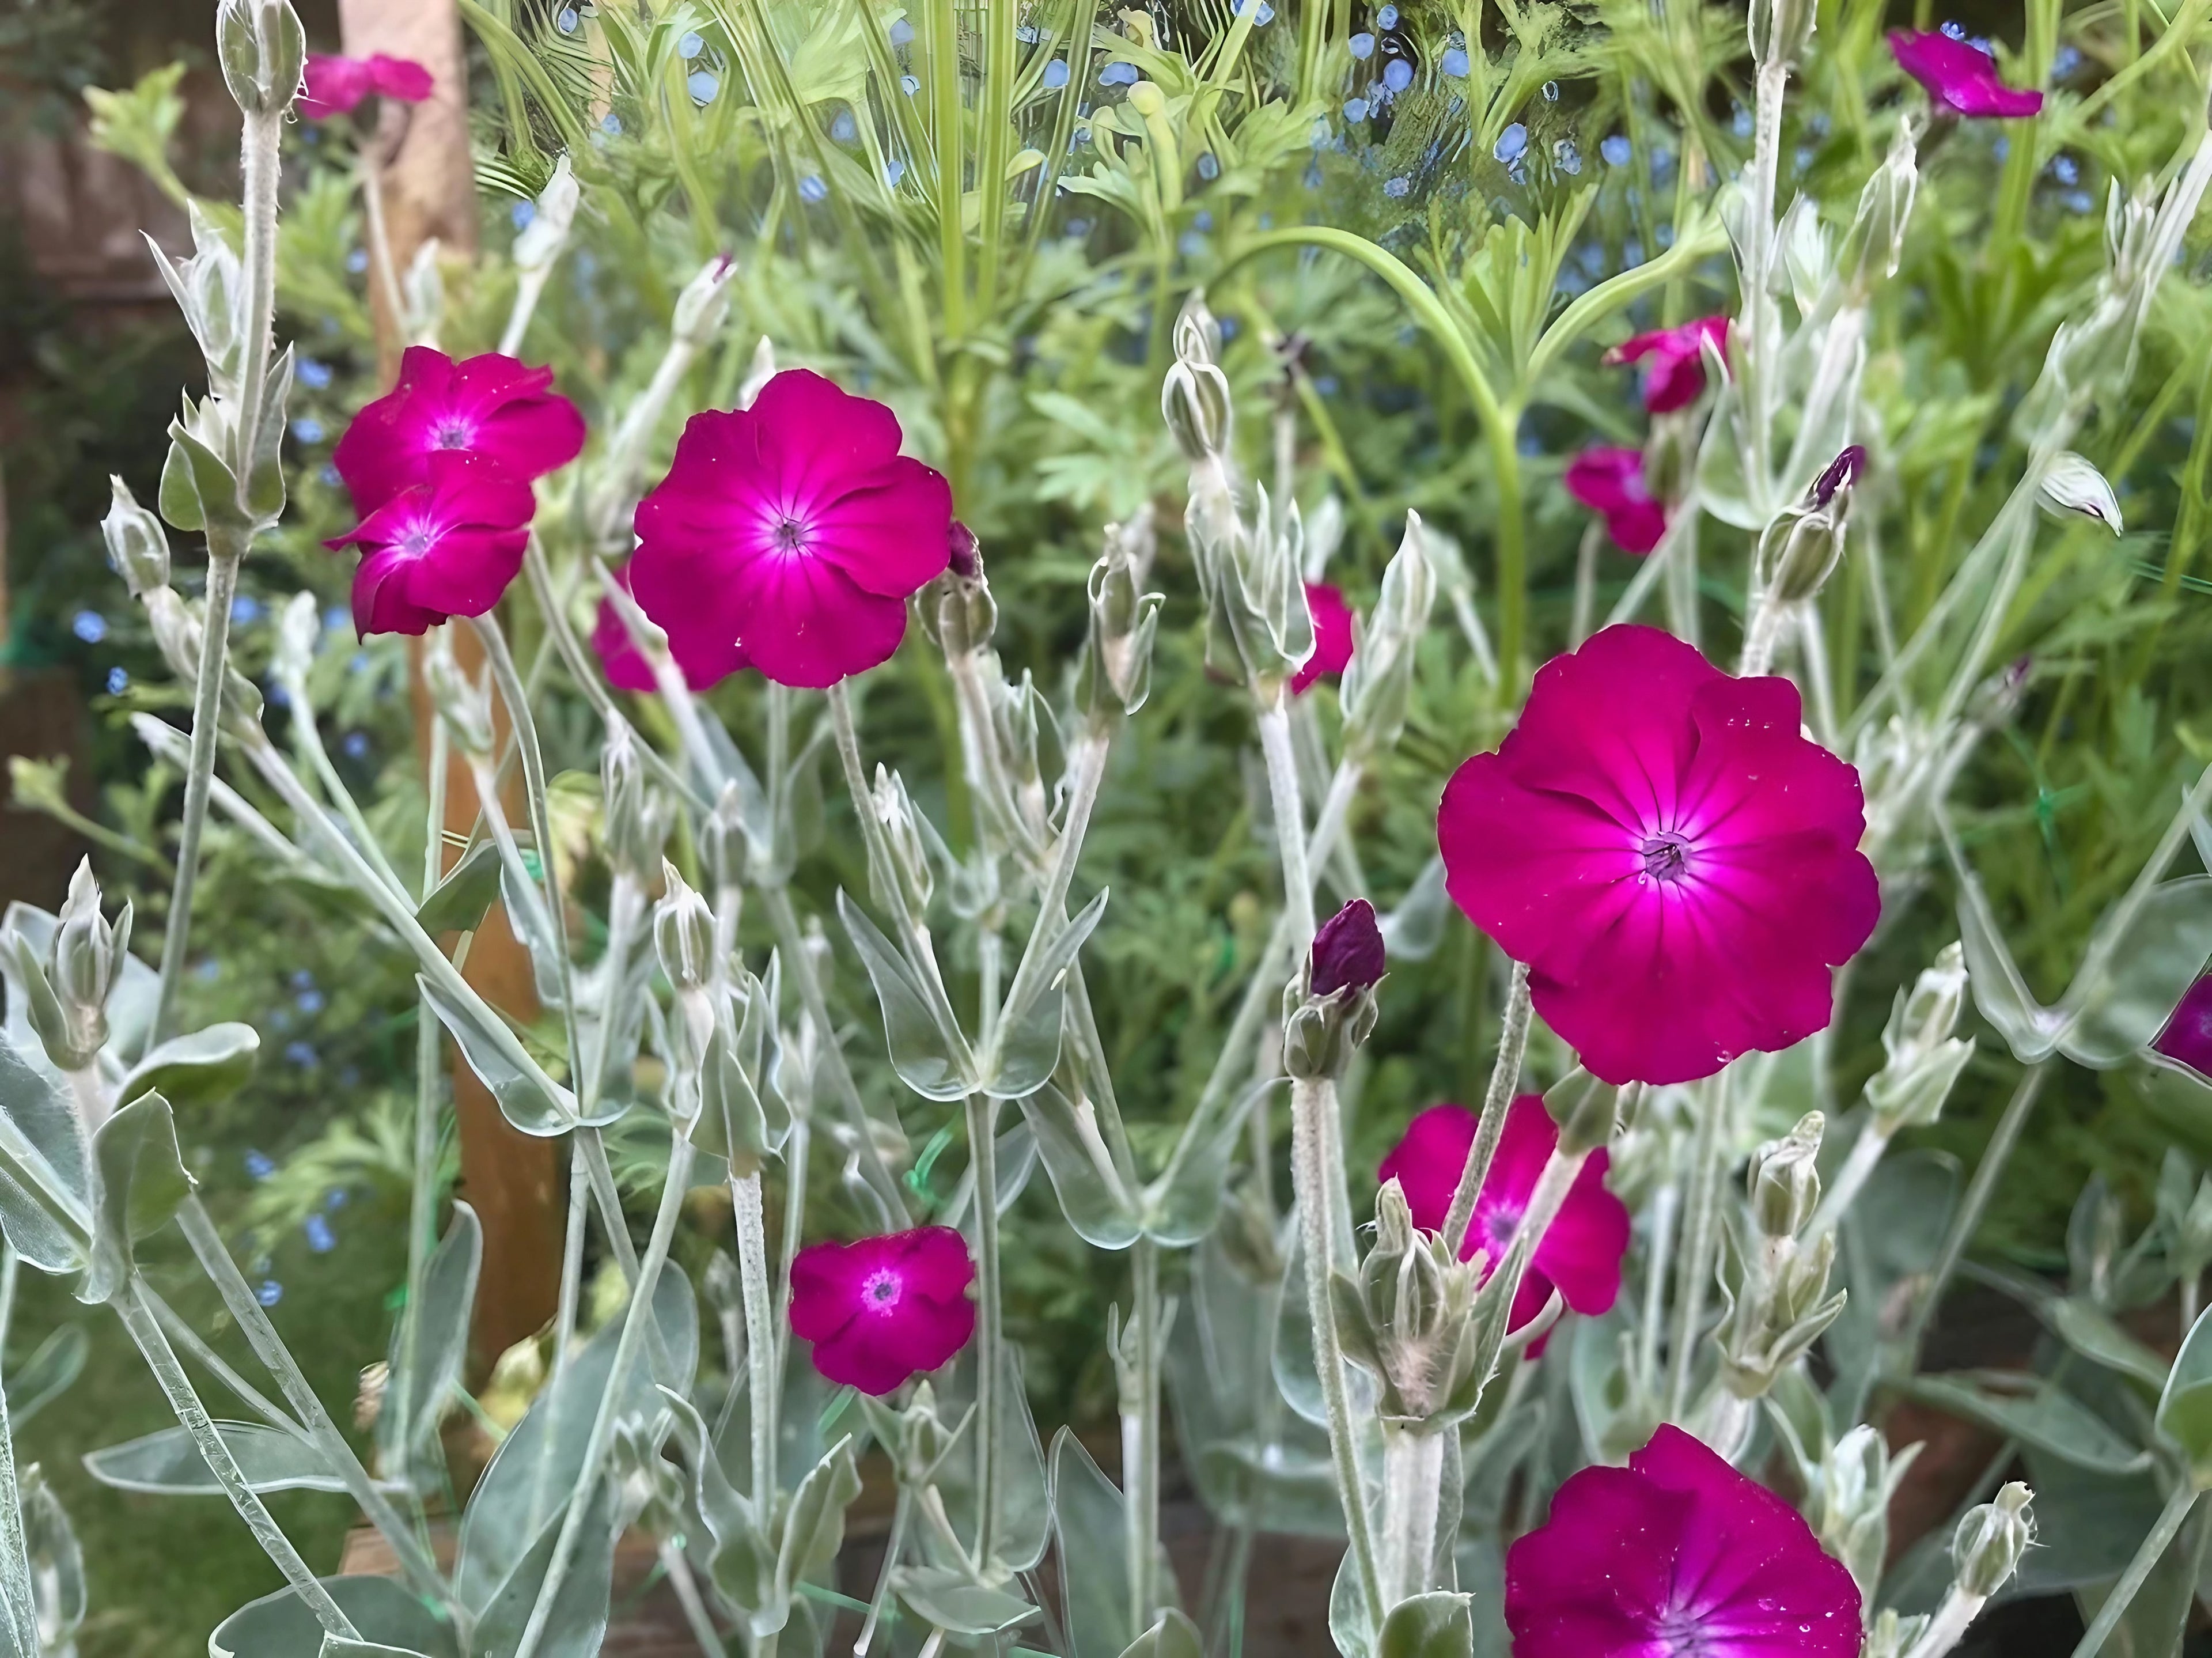 Magenta blooms of Rose Campion plant surrounded by green foliage